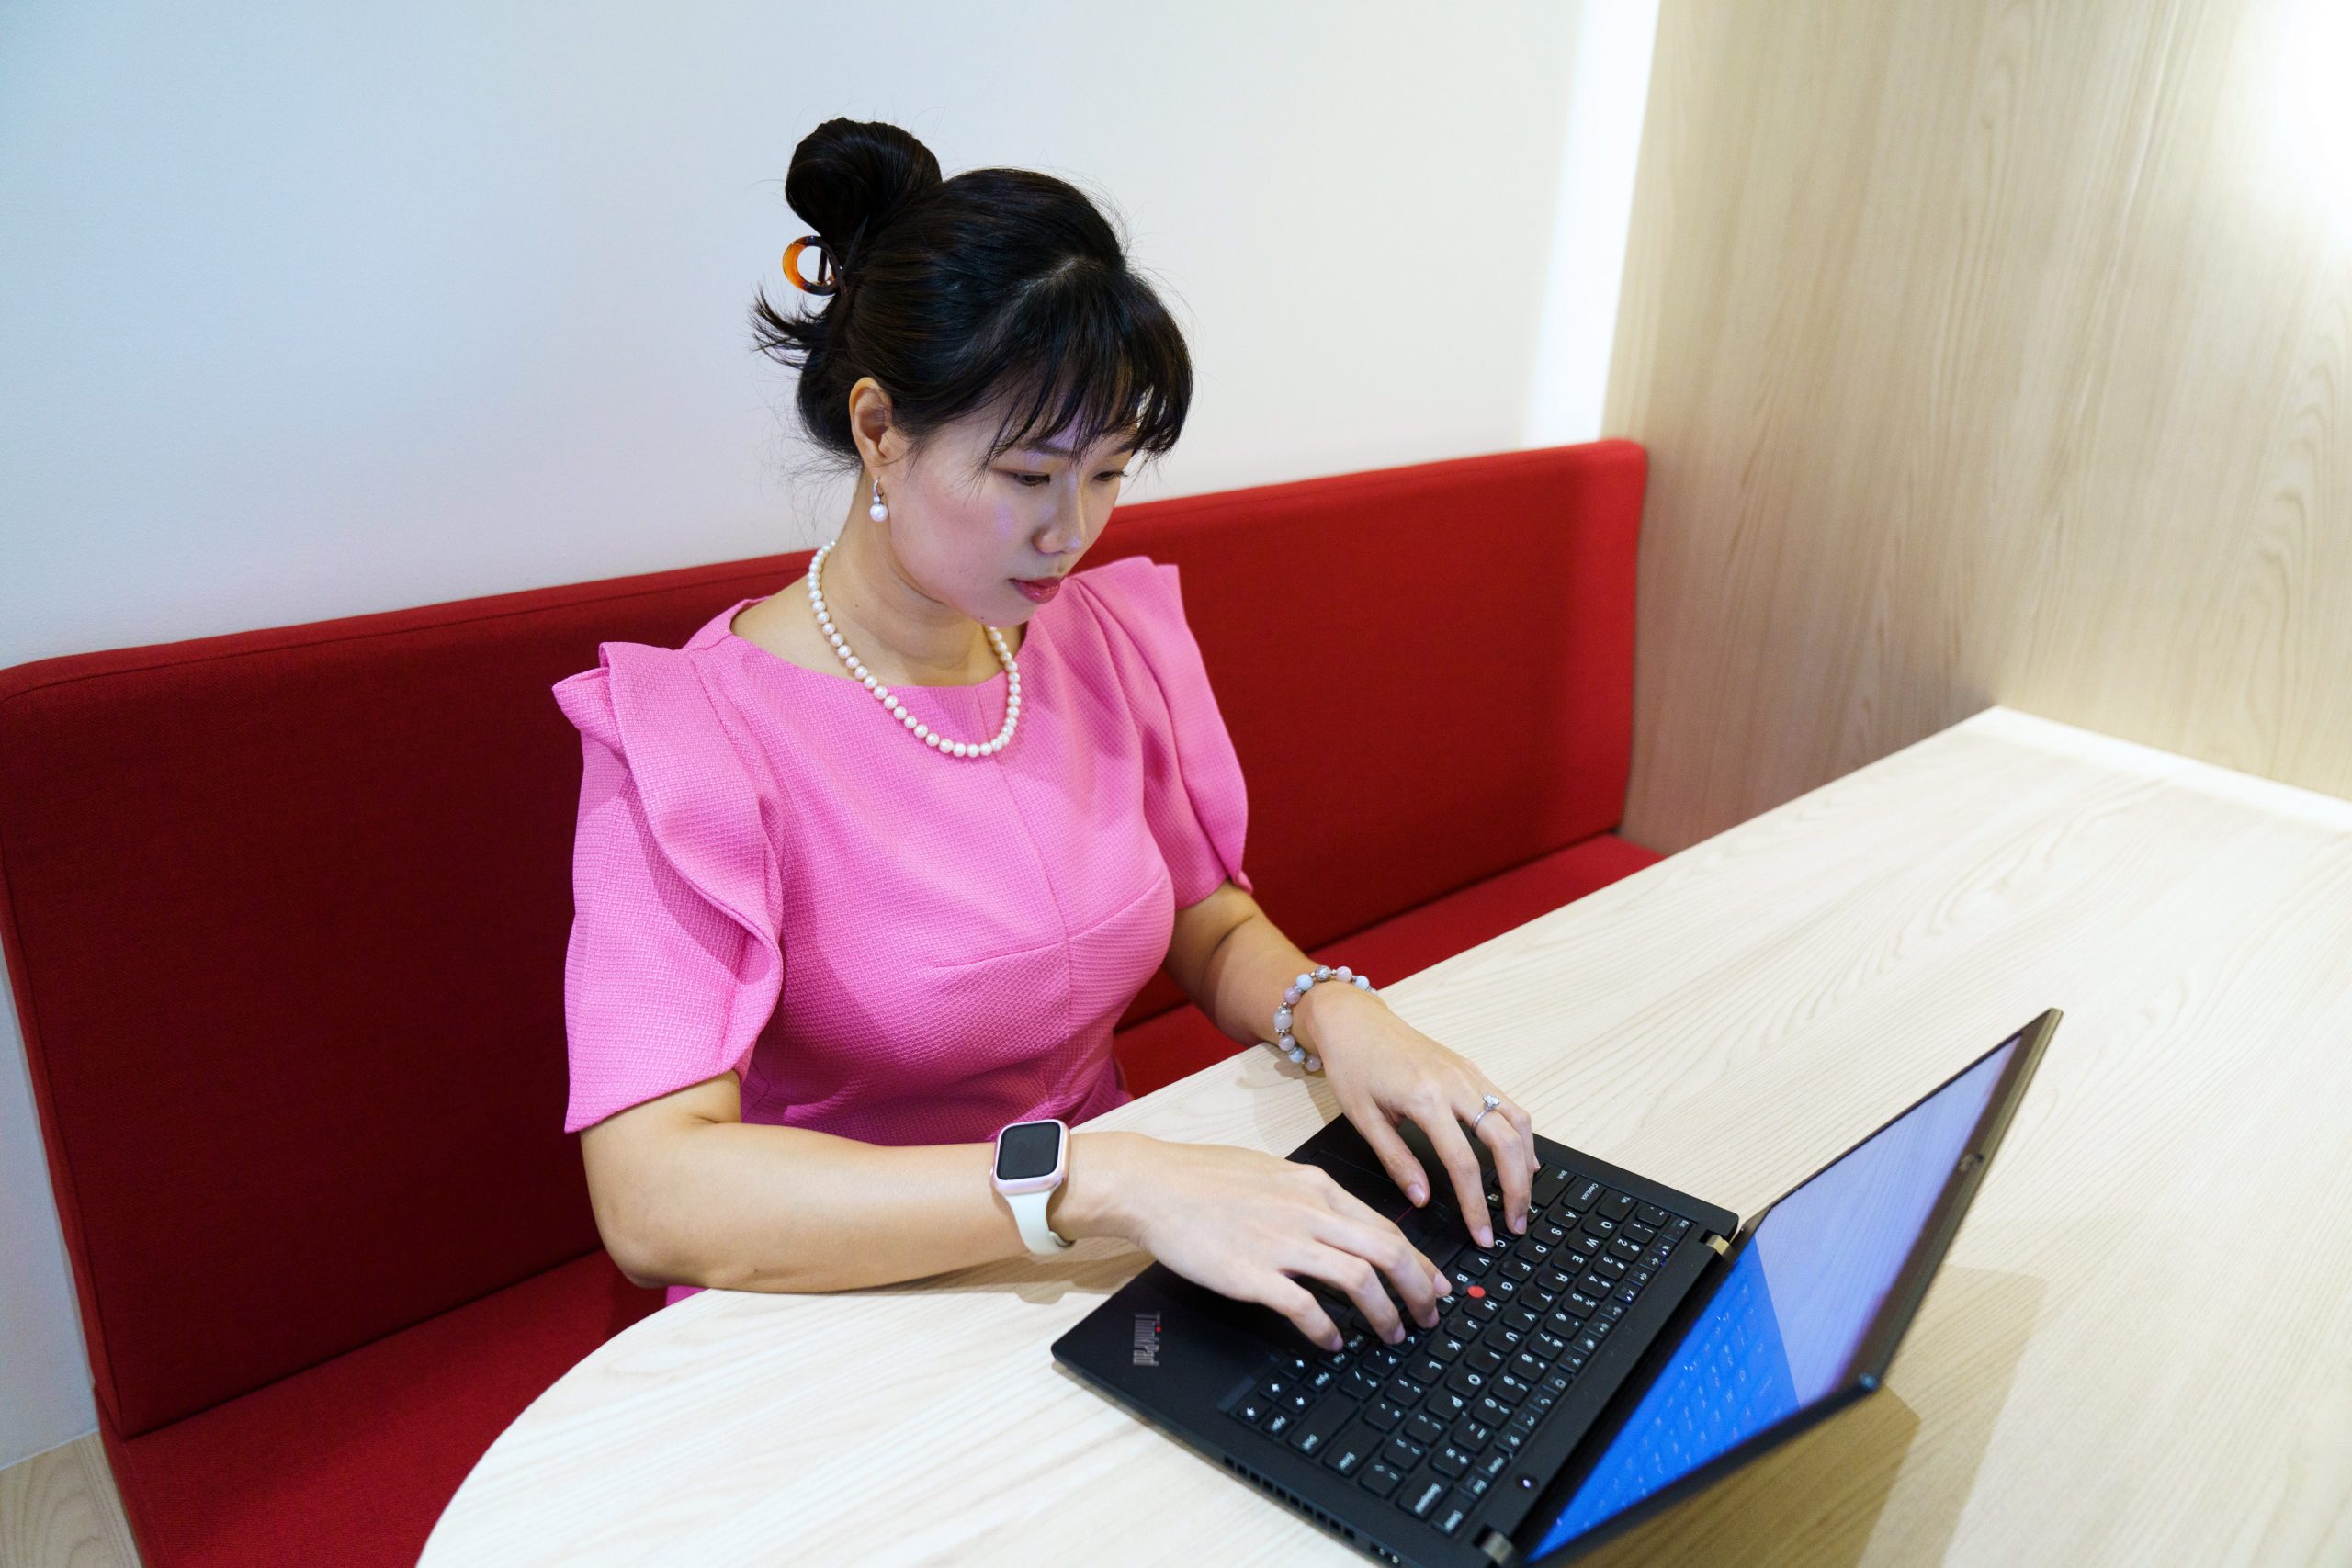 A woman seated at a table, working on her laptop